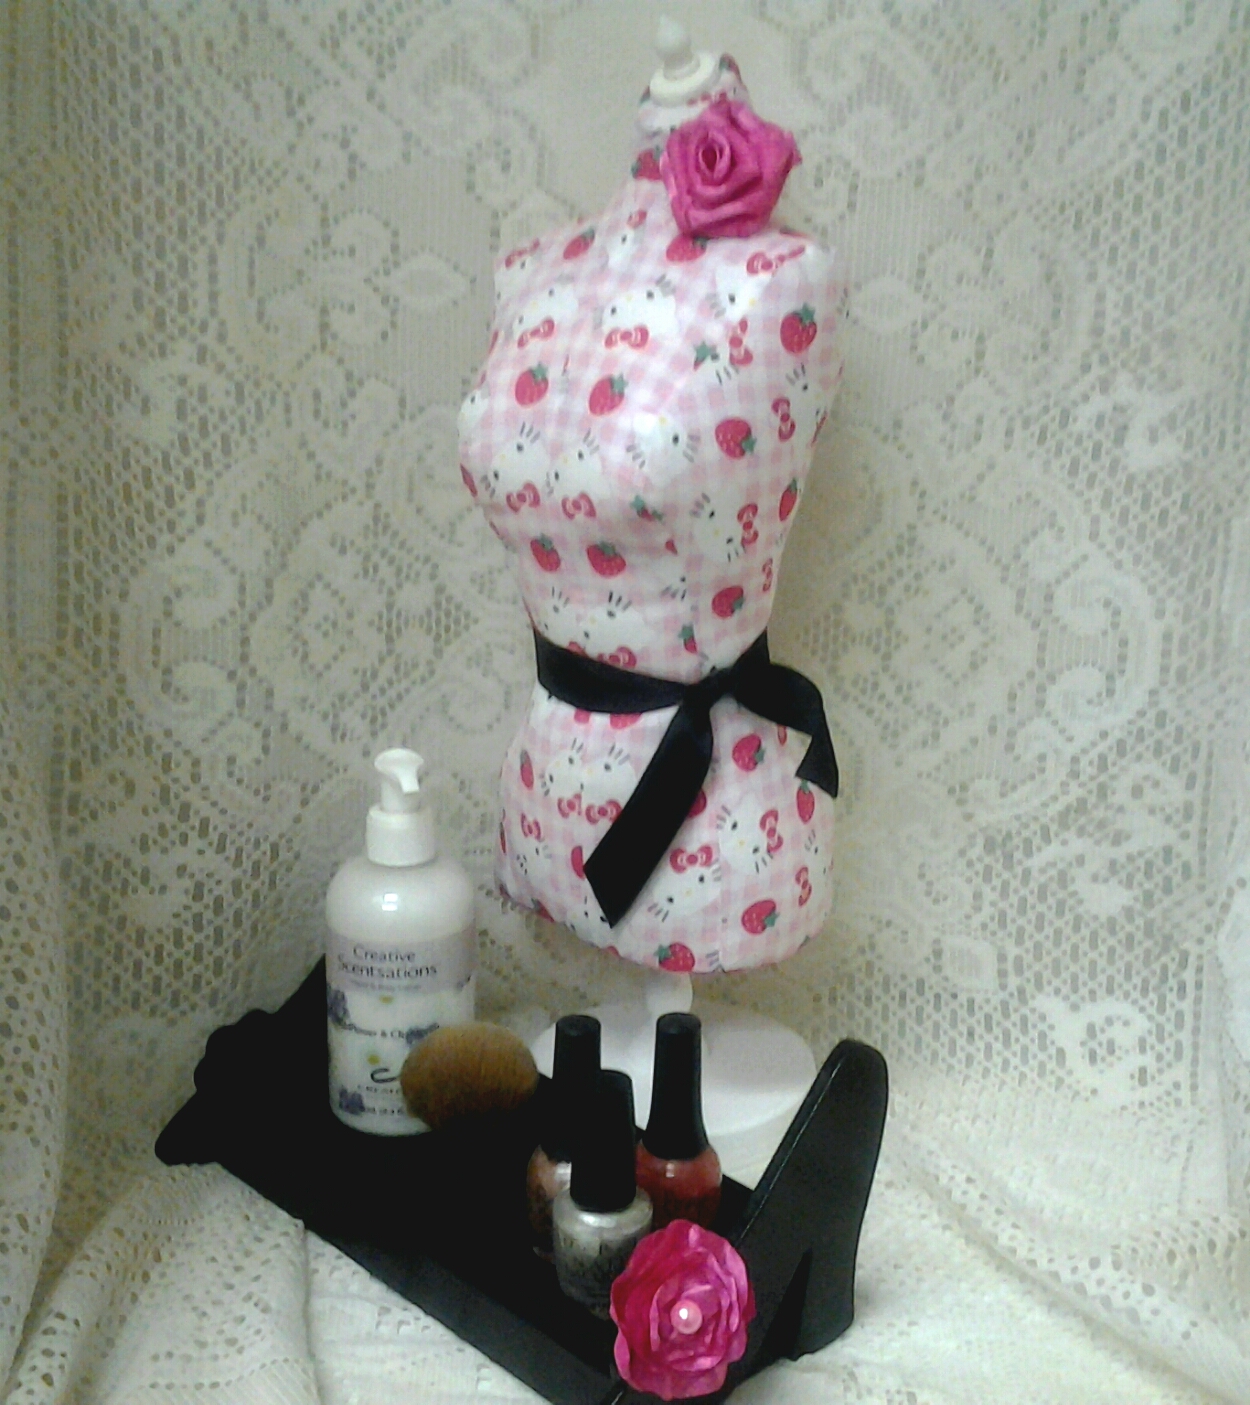 Boutique Shoe Organizer High Heels And Dress Form, Great On A Vanity To Hold Nail Polish, Perfume, Make Up Organizer, Earring Holder, Etc.